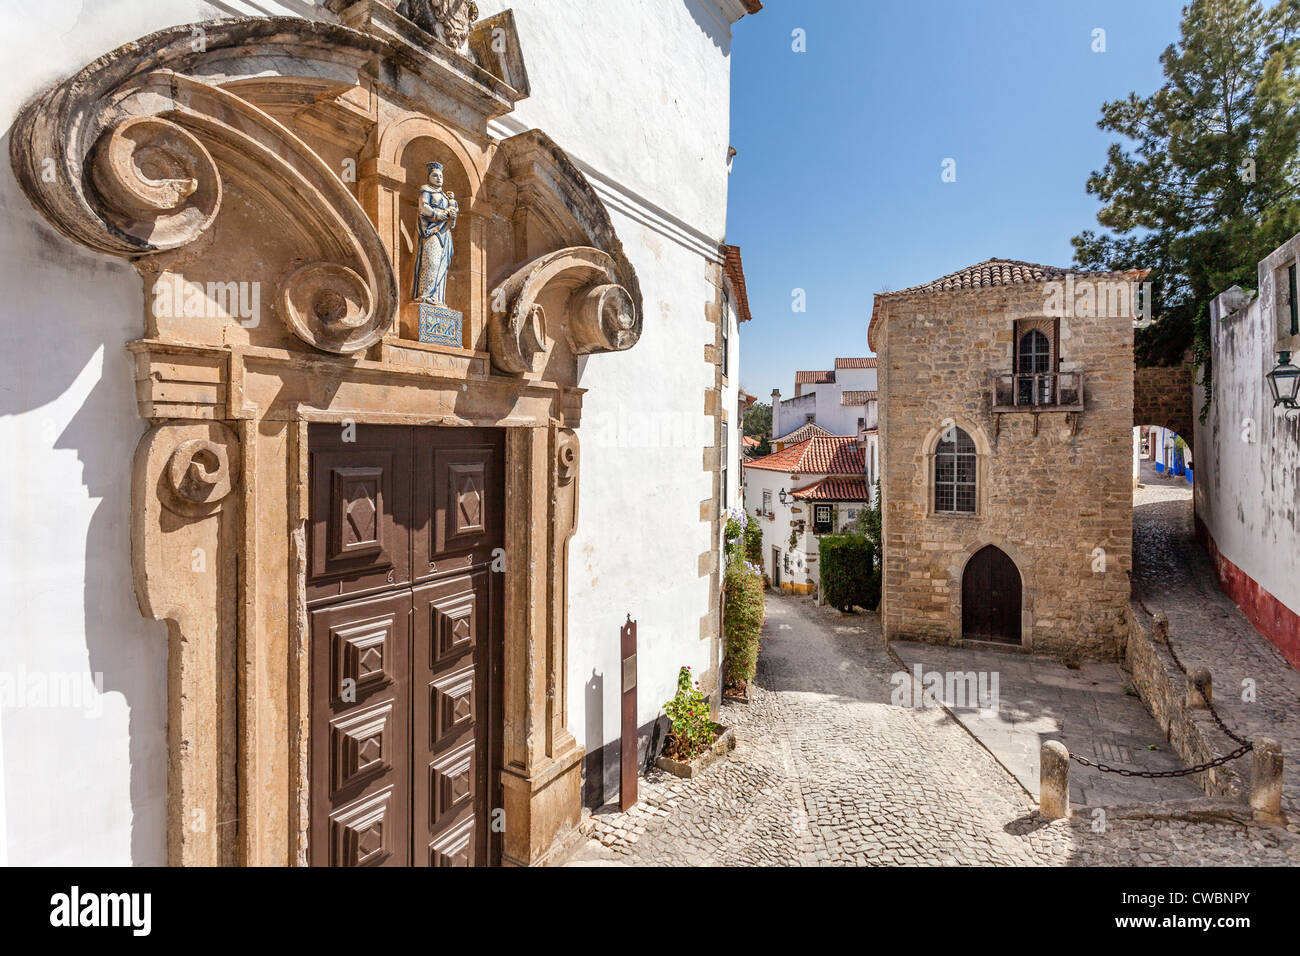 Medieval Synagogue (back) and Misericordia Church Portal (16th century - Renaissance/Mannerist) in Óbidos, Portugal. Stock Photo